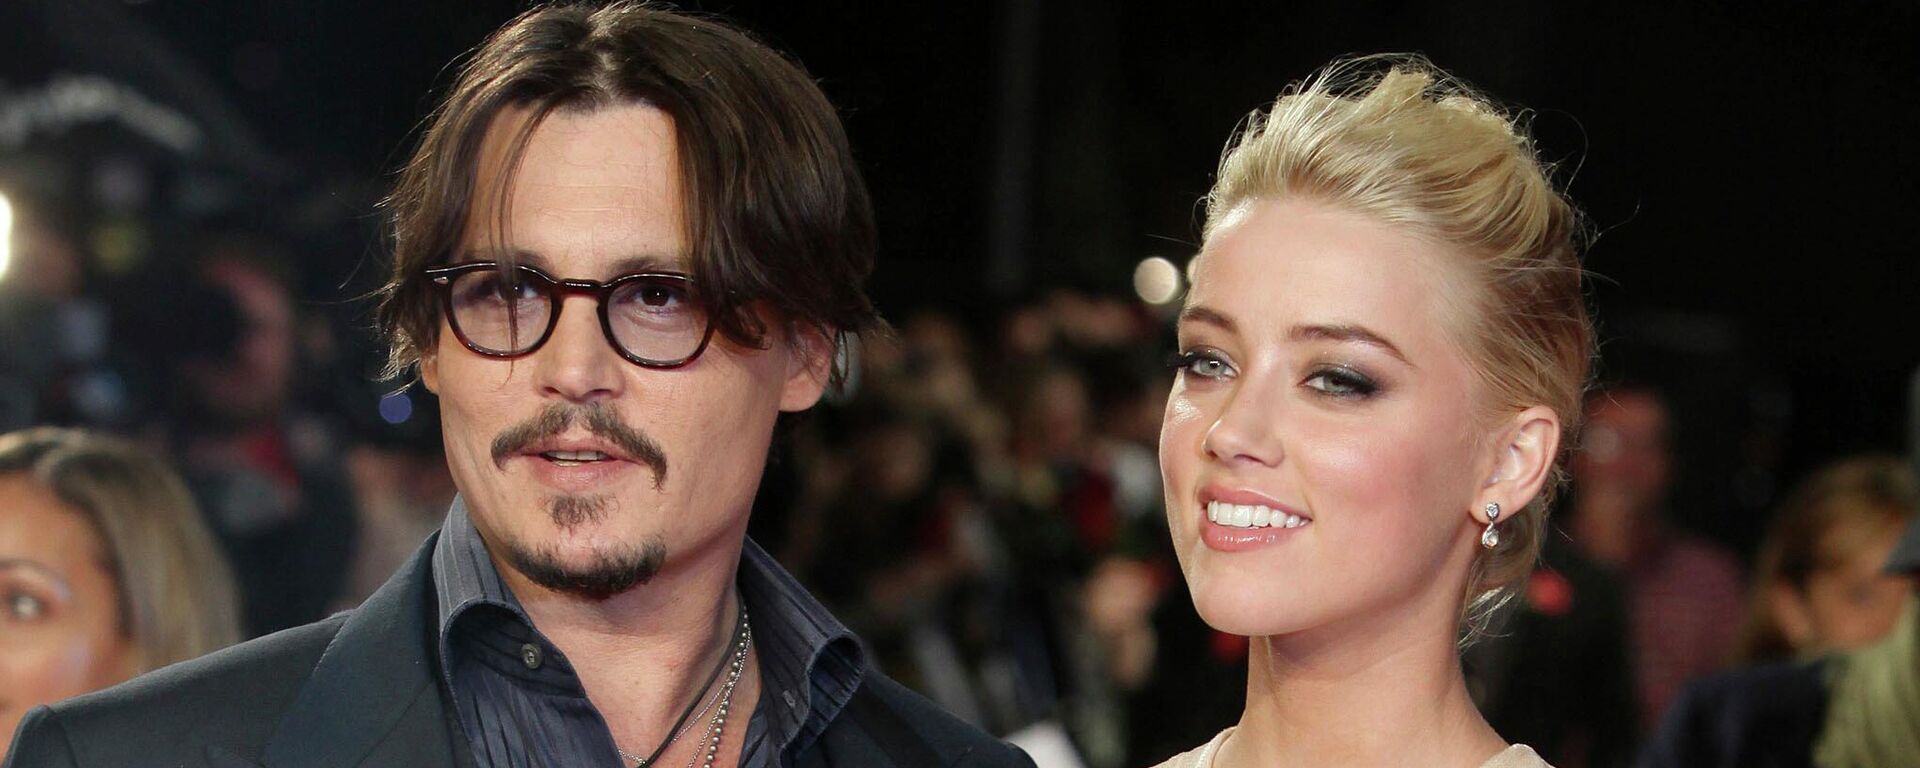 In this Nov. 3, 2011 file photo, U.S. actors Johnny Depp, left, and Amber Heard arrive for the European premiere of their film, The Rum Diary, in London.Heard is asking a judge to dismiss a $50 million defamation lawsuit her ex-husband Johnny Depp filed over a Washington Post op-ed she wrote about domestic violence. In the motion filed Thursday in Fairfax, Virginia, Heard’s lawyers reiterate allegations that Depp abused her and include exhibits such as photos of her with bruised face and scarred arms.  - Sputnik International, 1920, 01.06.2022